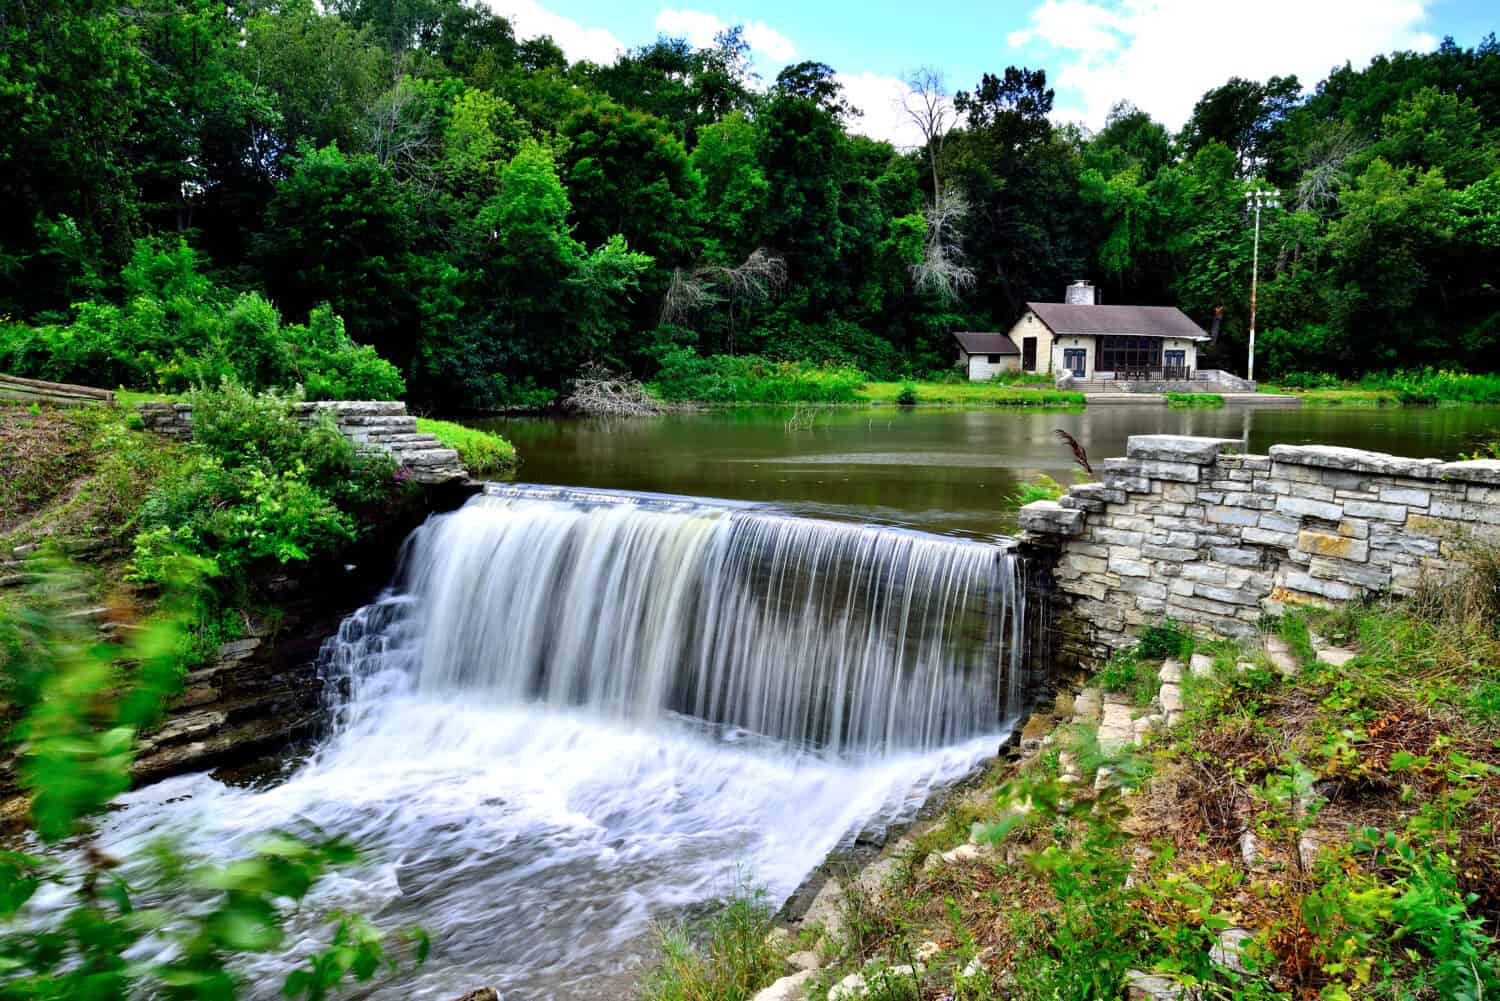 The dam at Oak Creek Pond with a park building in the background on a beautiful summer weekday.  The long exposure gives the waterfall a cottonlike appearance.  The park is in South Milwaukee.  